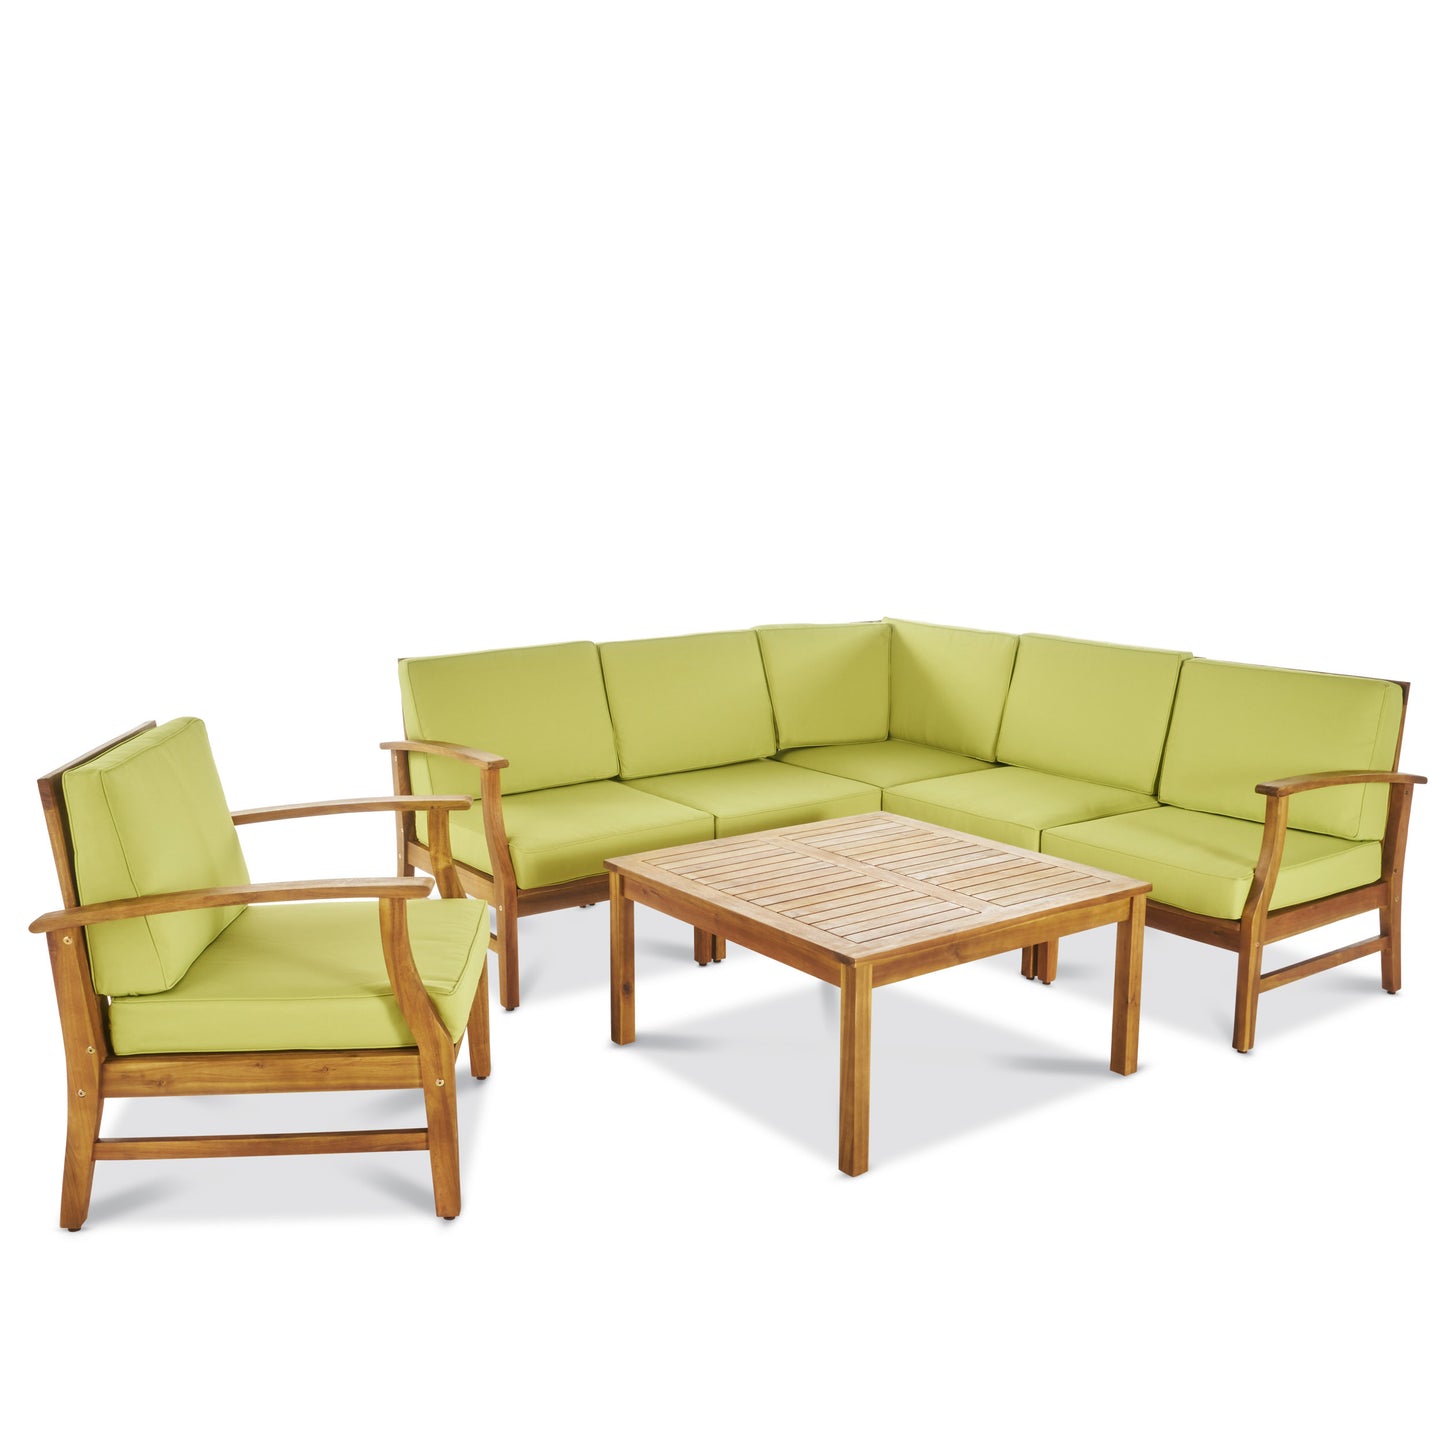 Capri 6-Seater Outdoor Wooden Sectional